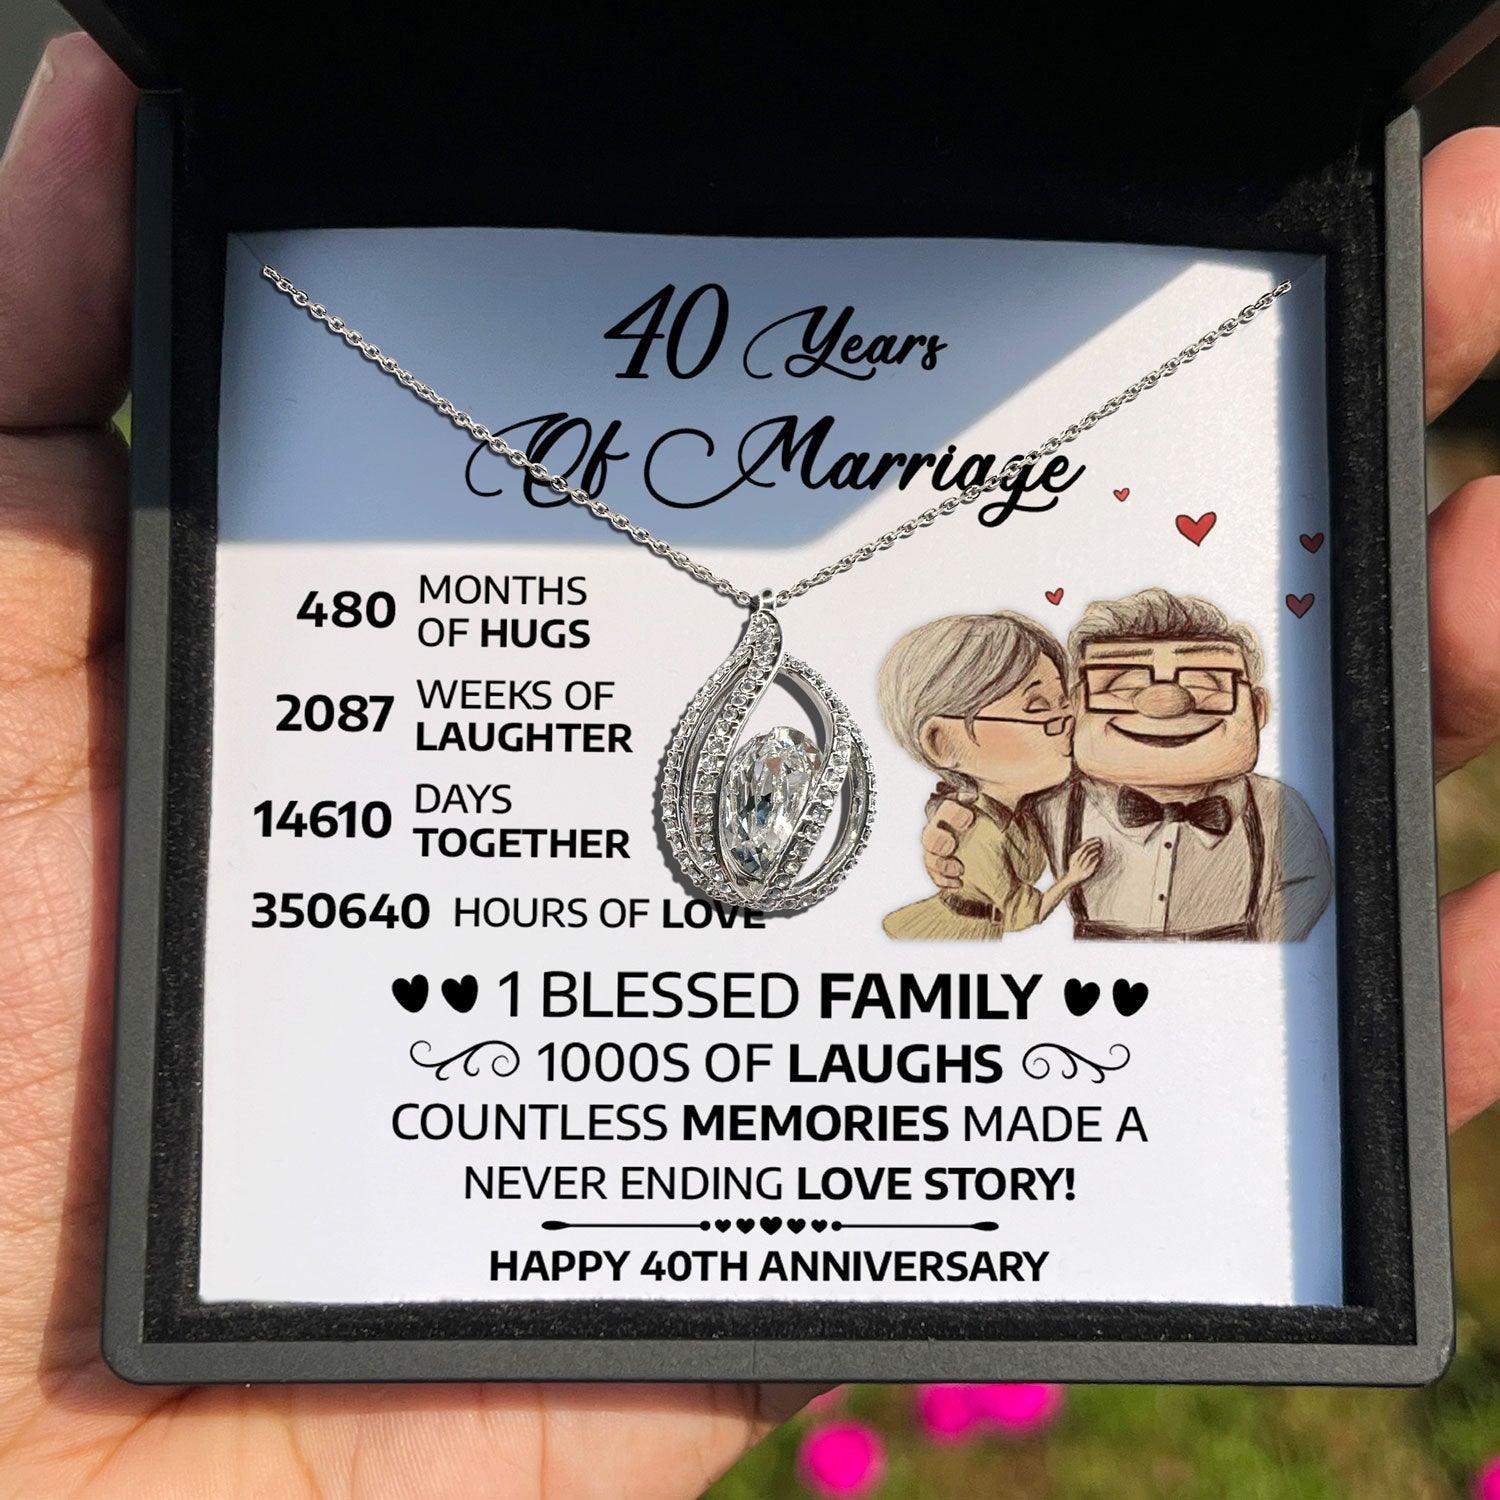 Anniversary Gifts for Her -  480 Months Of Hugs, 2087 Weeks Of Laughter, Happy 40th Anniversary - Orbital Birdcage Necklace - TRYNDI